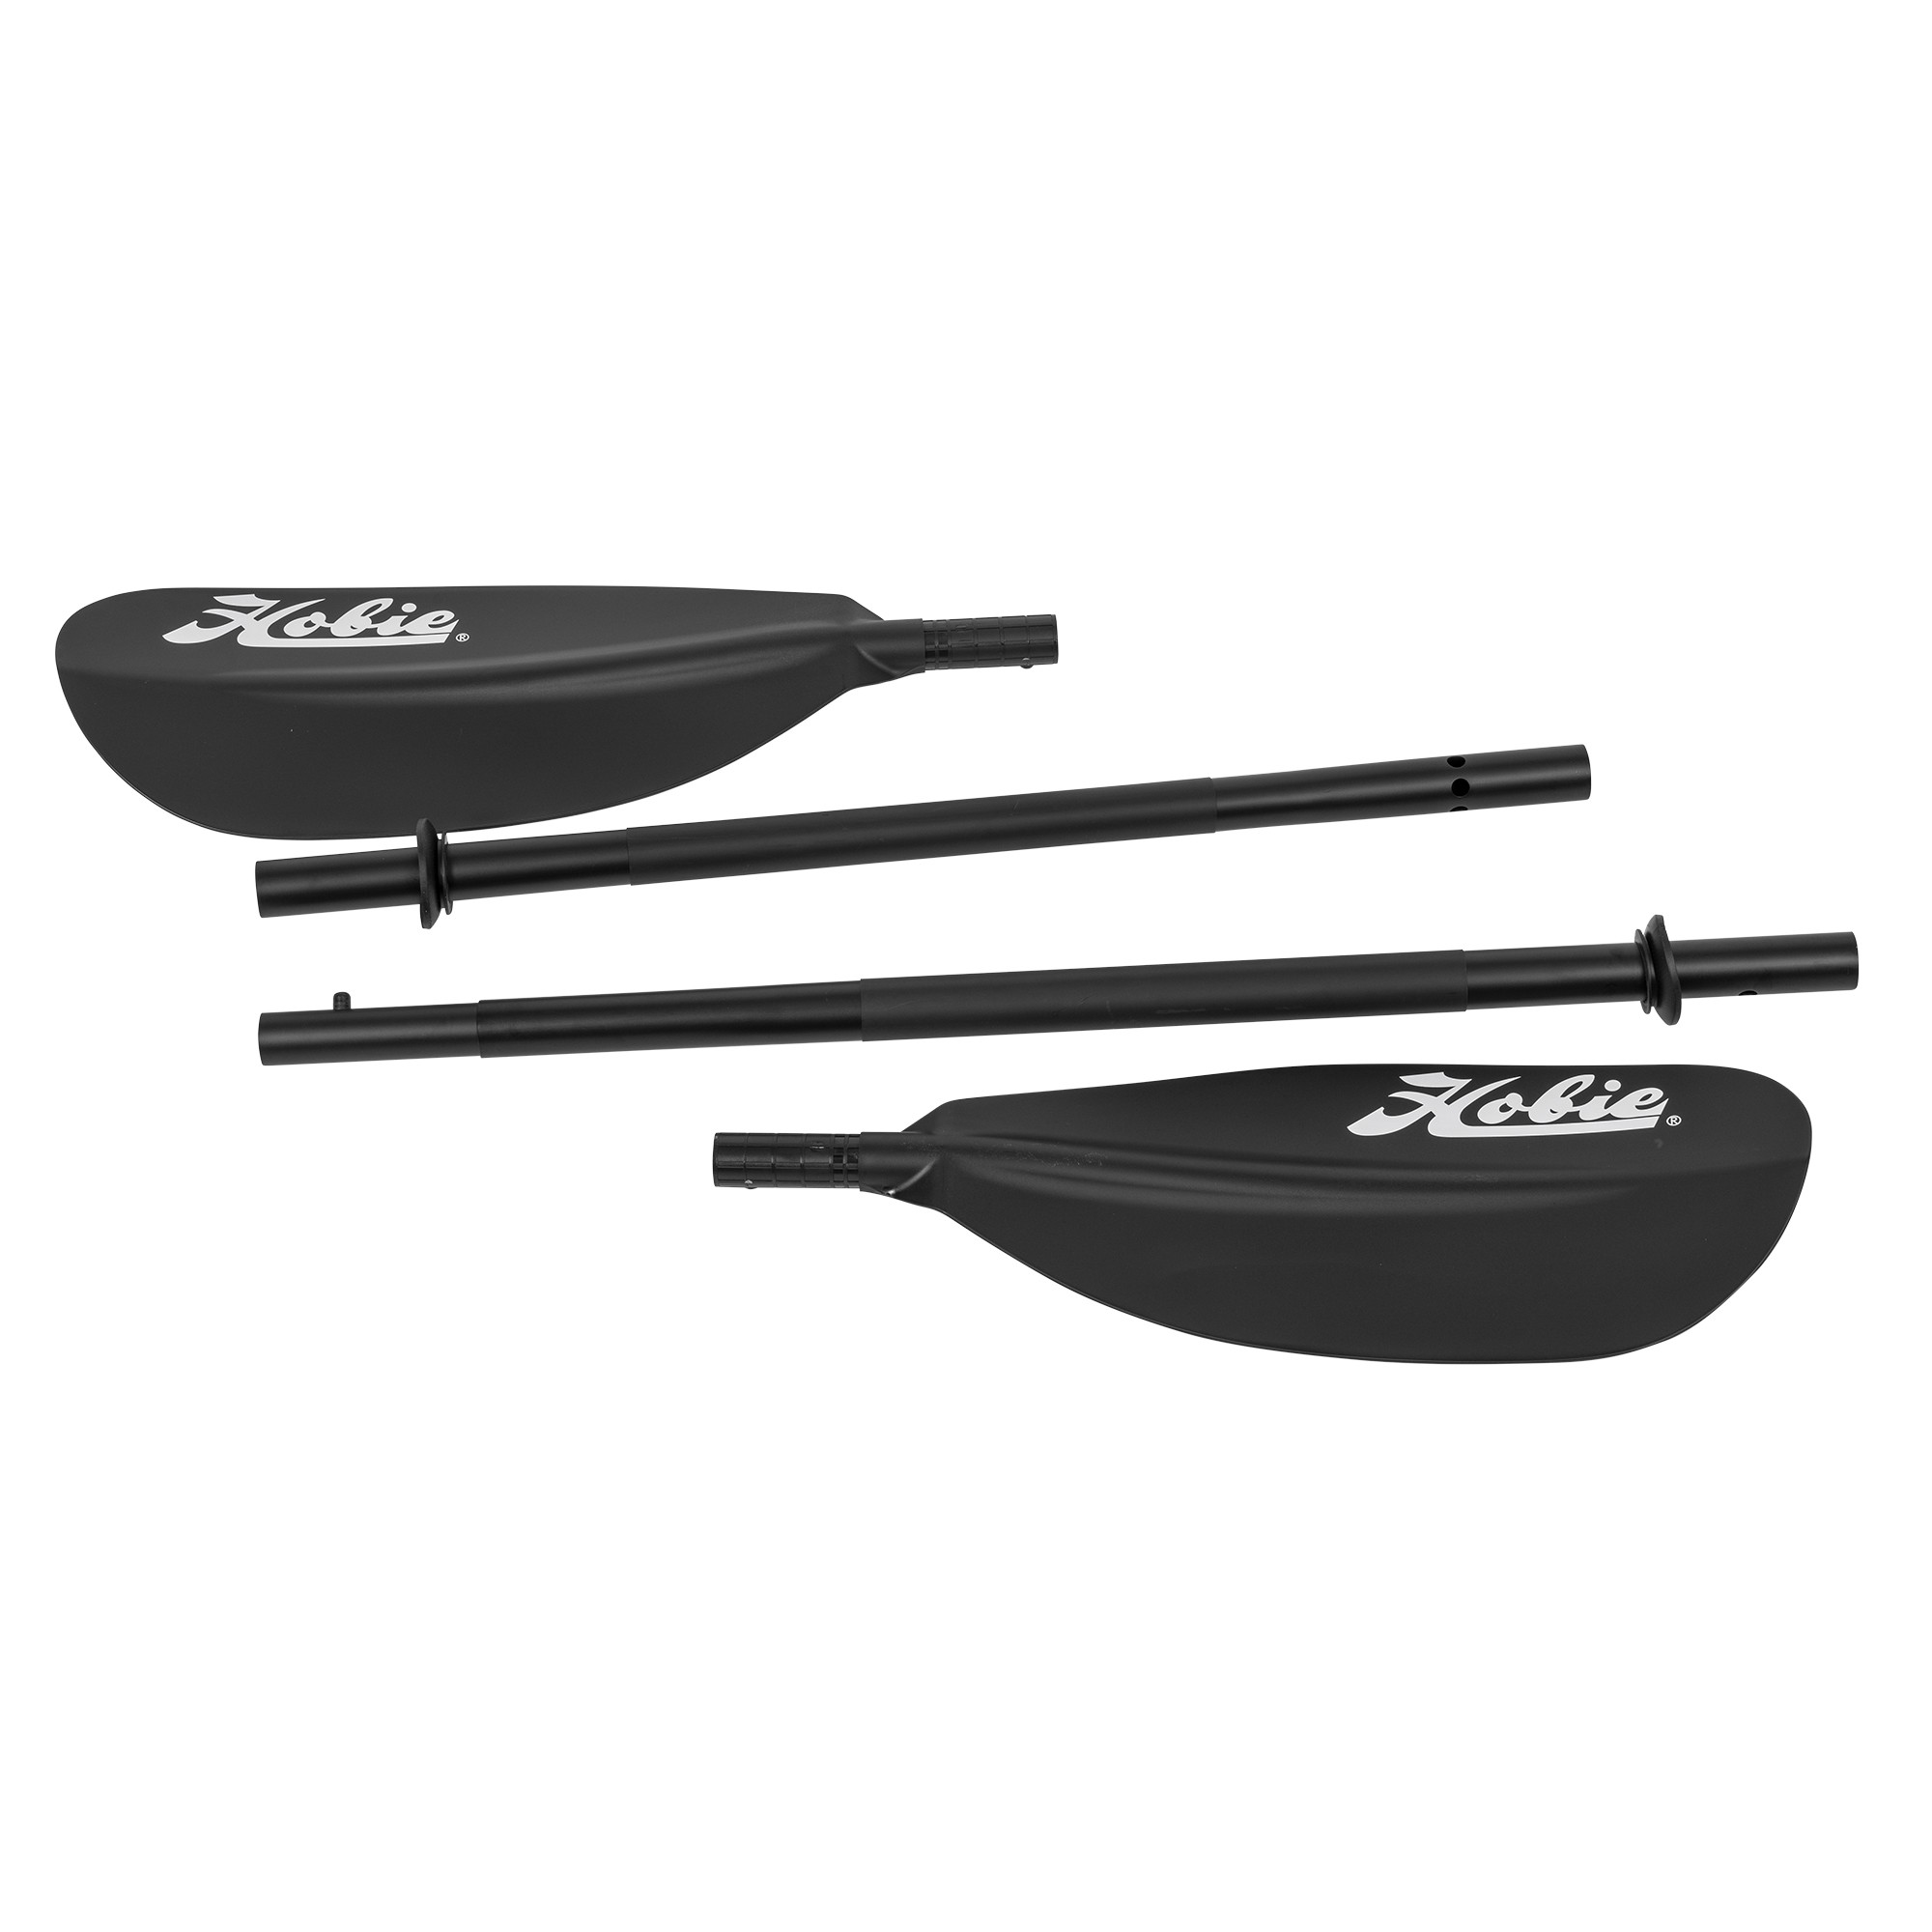 I-PADDLE, 4 PIECES